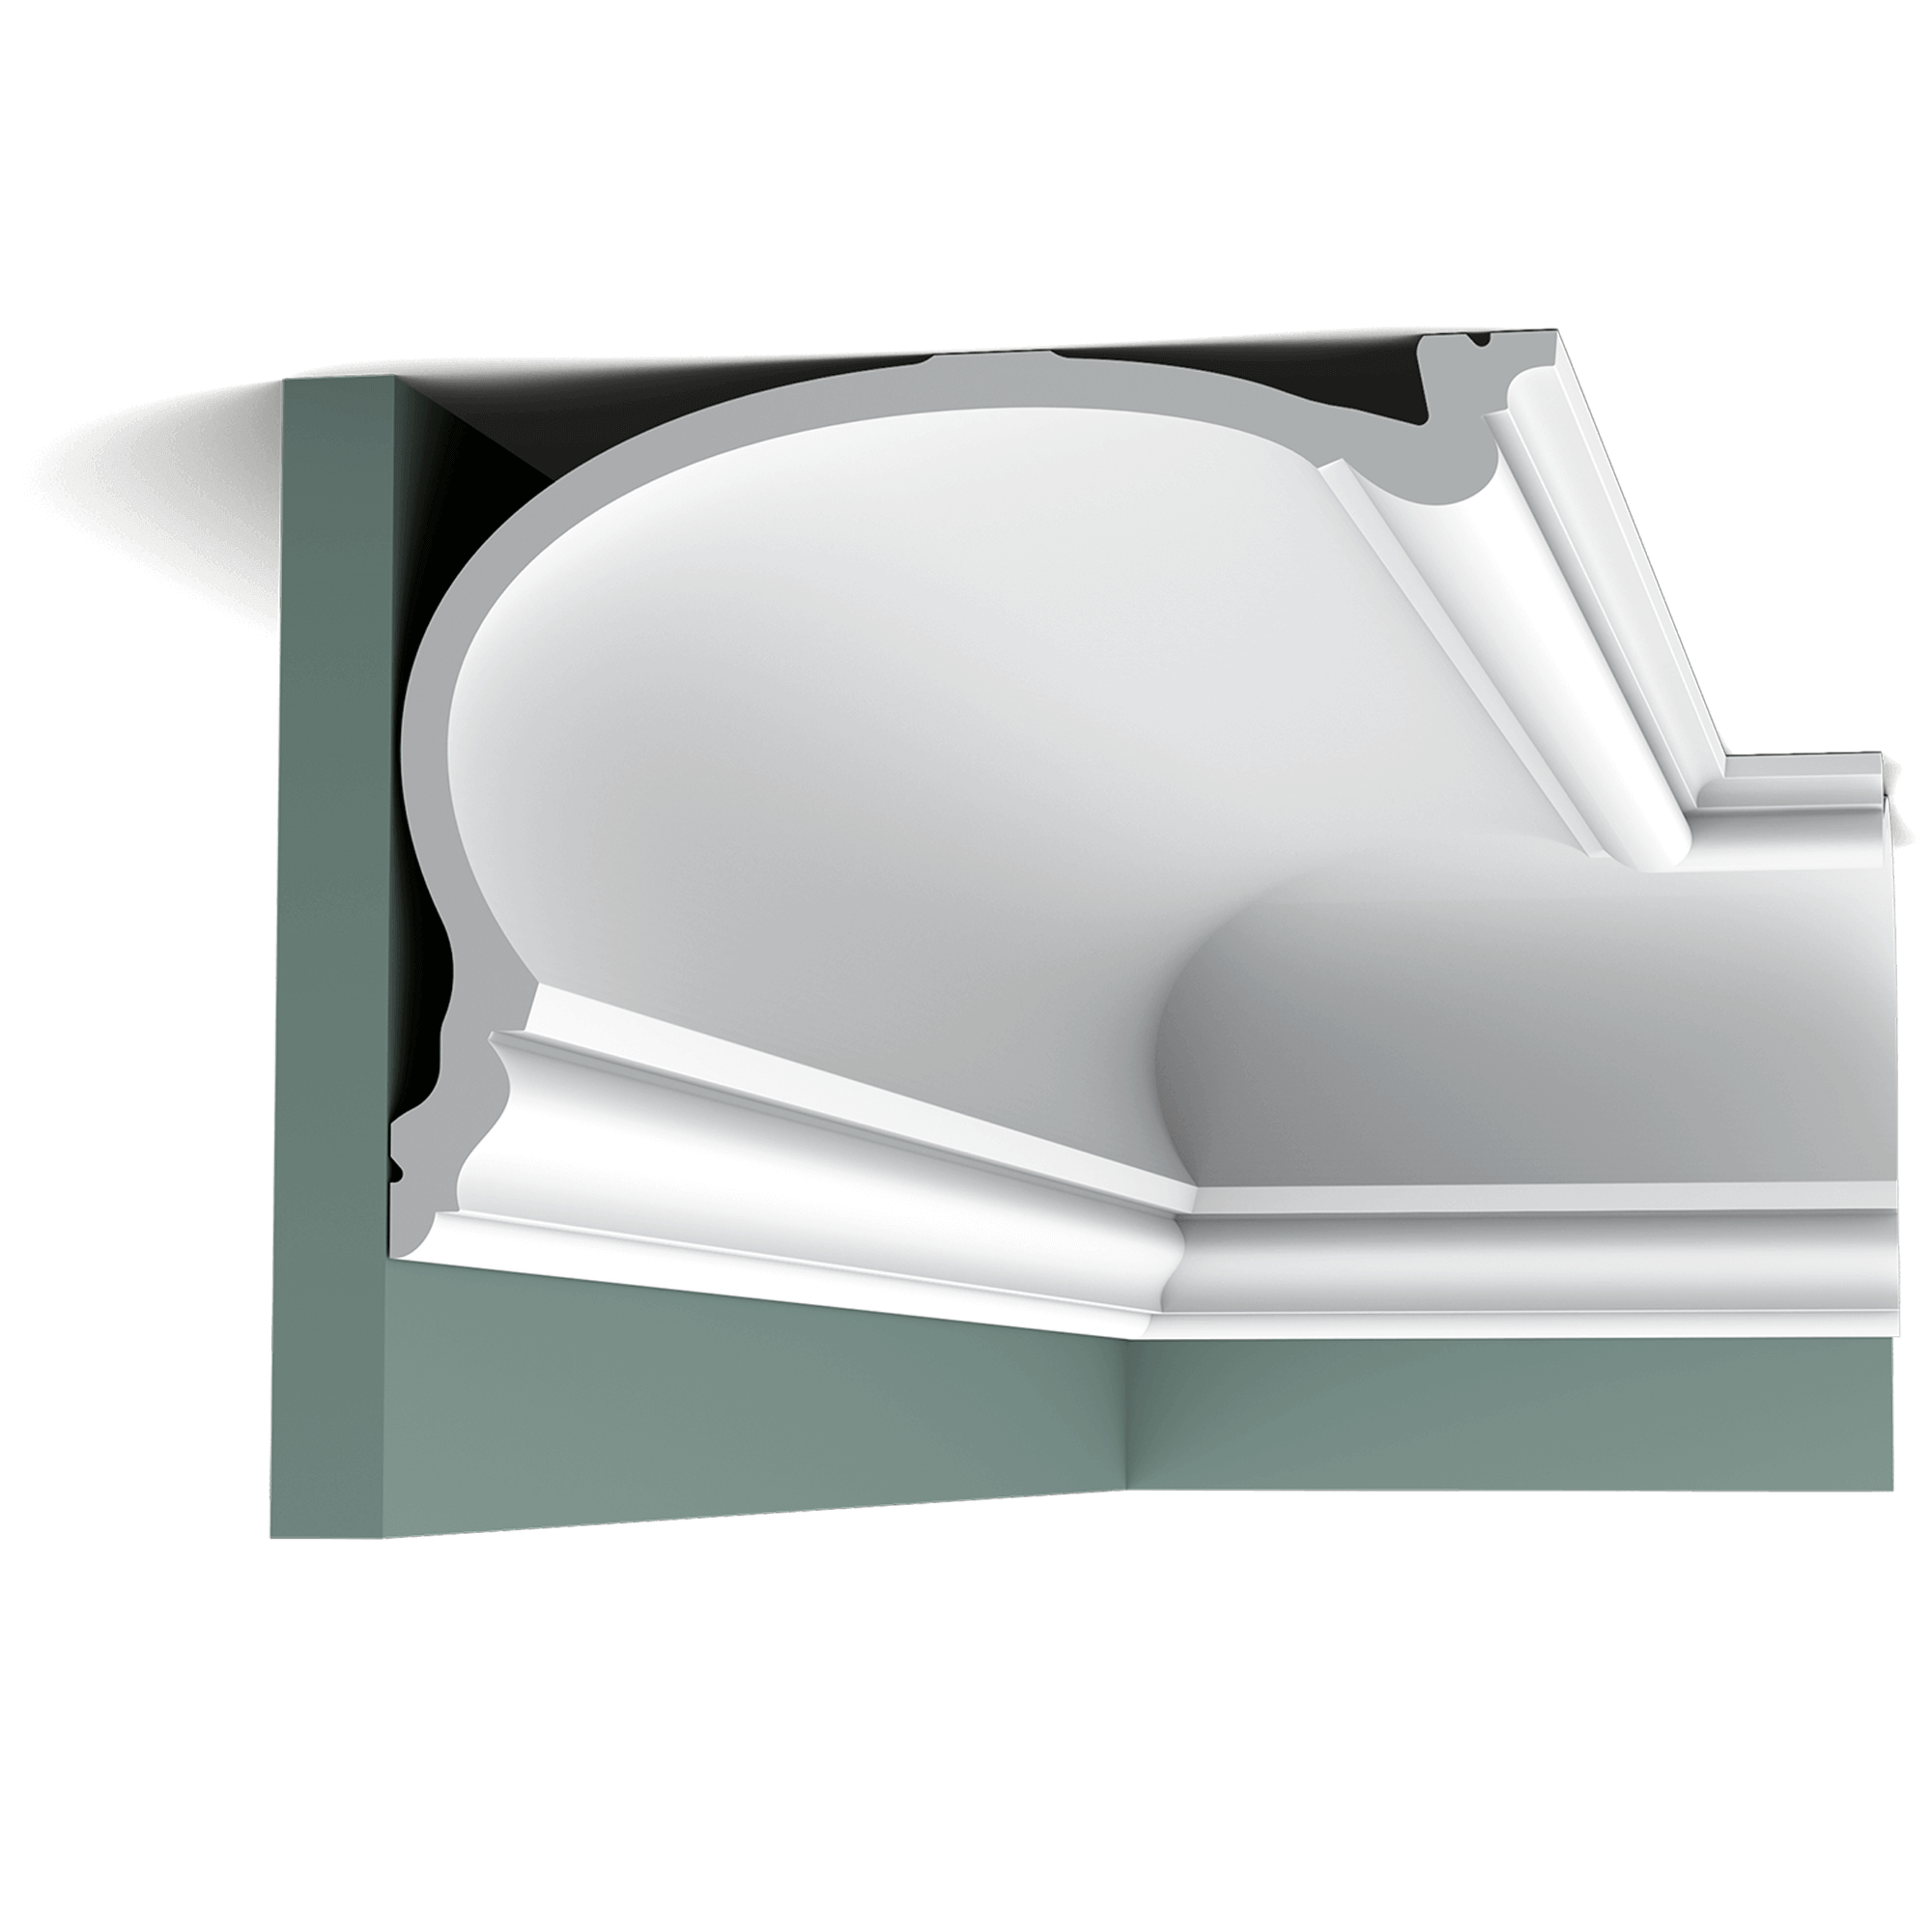 c343 cornice moulding fee6 The second-largest member of the HERITAGE family. A stately classic cornice moulding inspired by the rich heritage of English country homes. Installation remark: It is necessary to screw this profile on the wall.